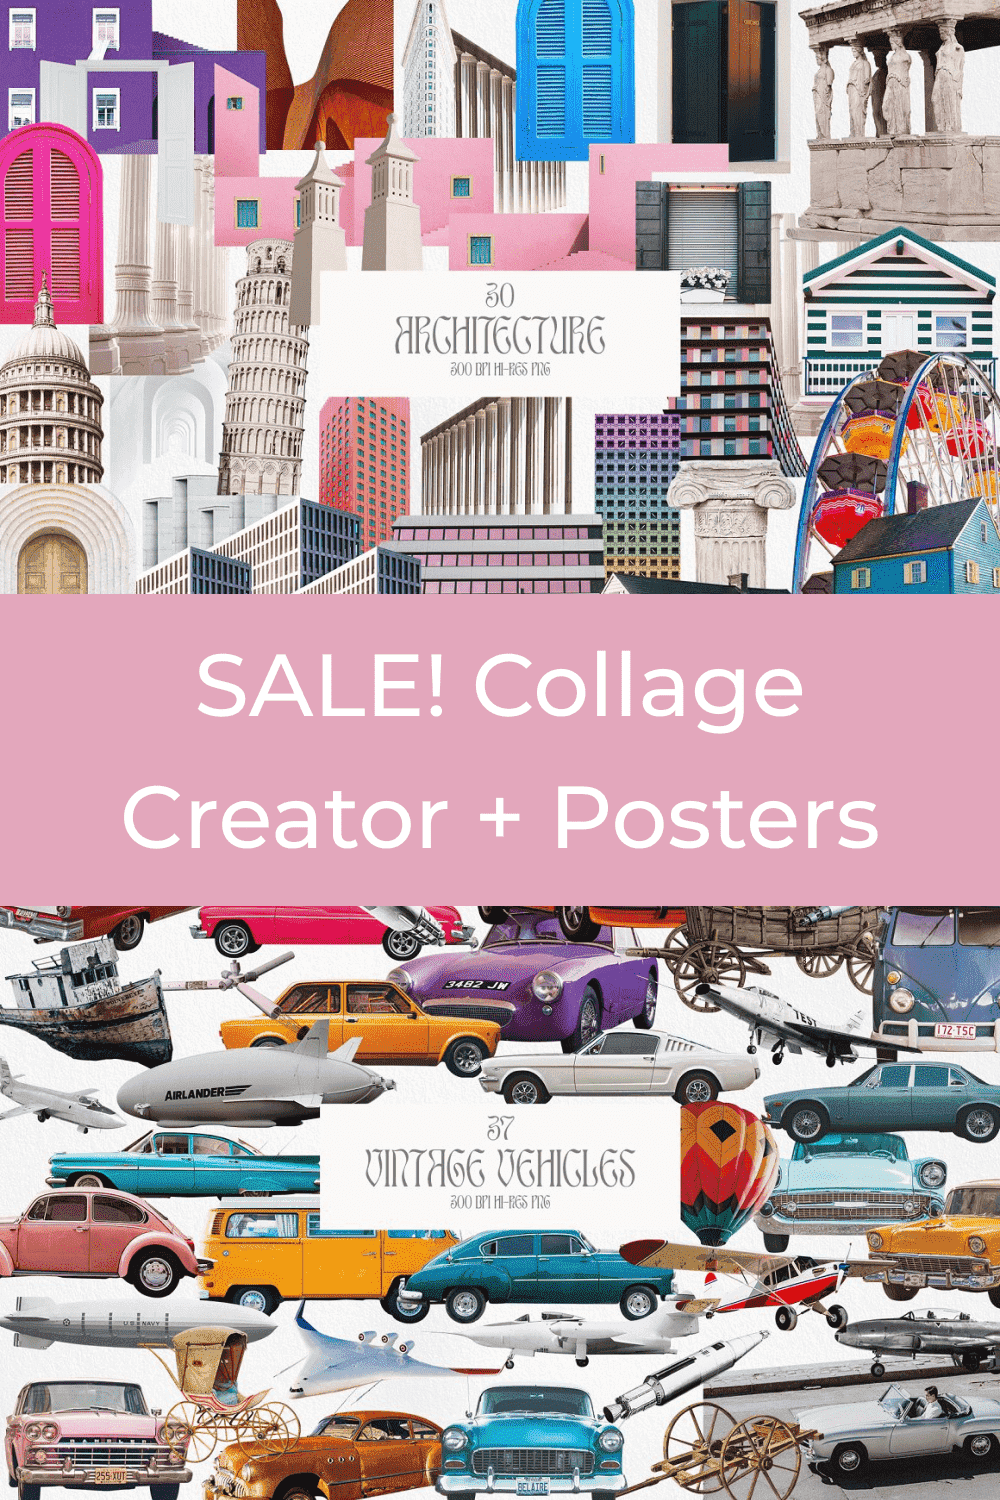 Sale! Collage Creator + Posters - Architecture And Vintage Vehicles.